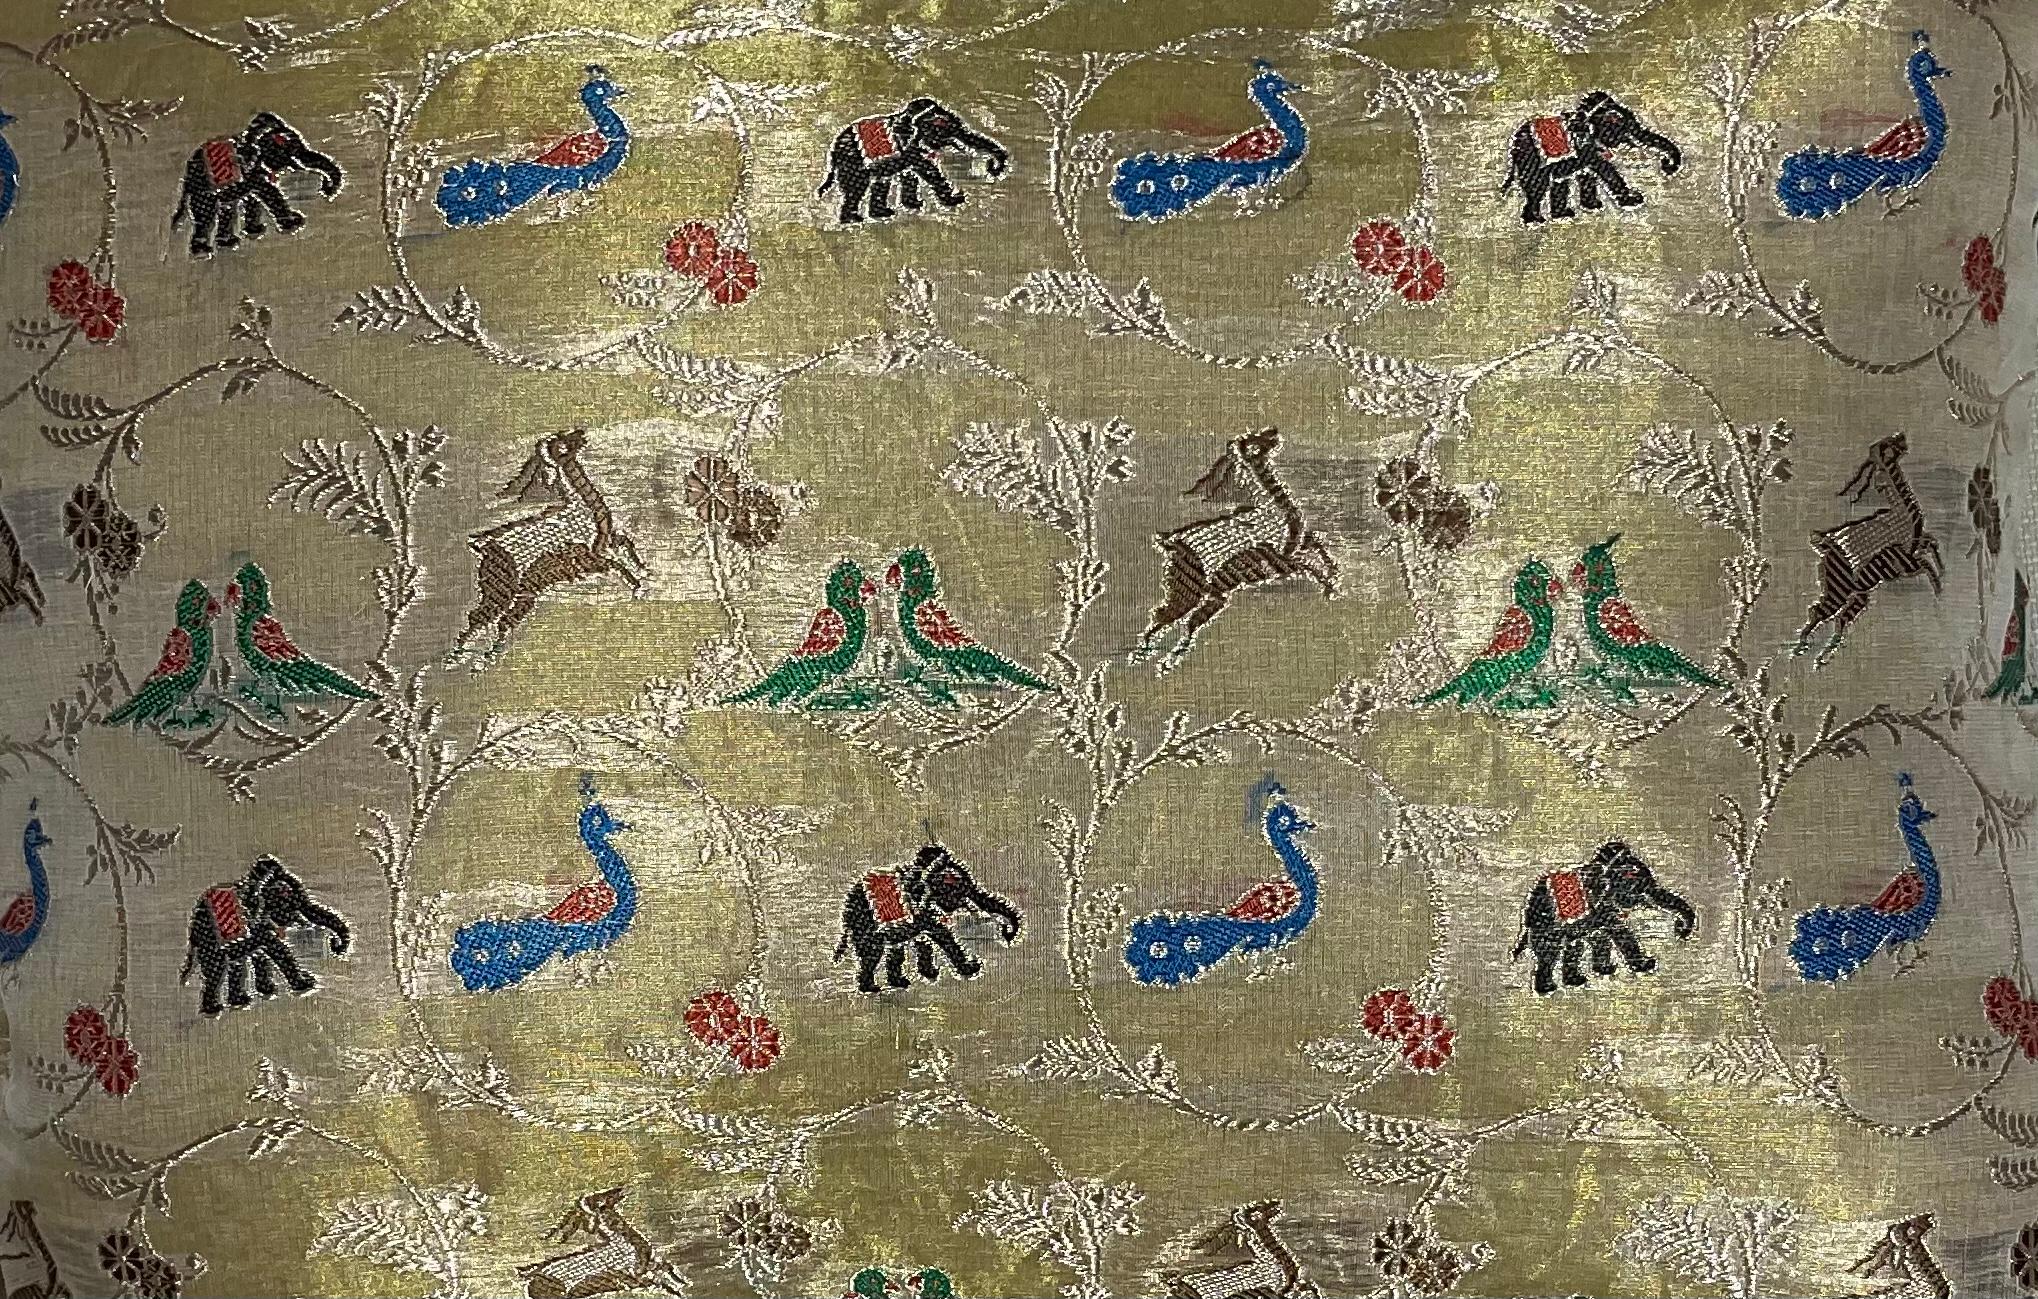 Beautiful pillow made of silk embroidery on metallic thread, with exceptional motifs of animals Elephant deer peacock and parrots and floral background.
Double inside lining, fresh quality insert.